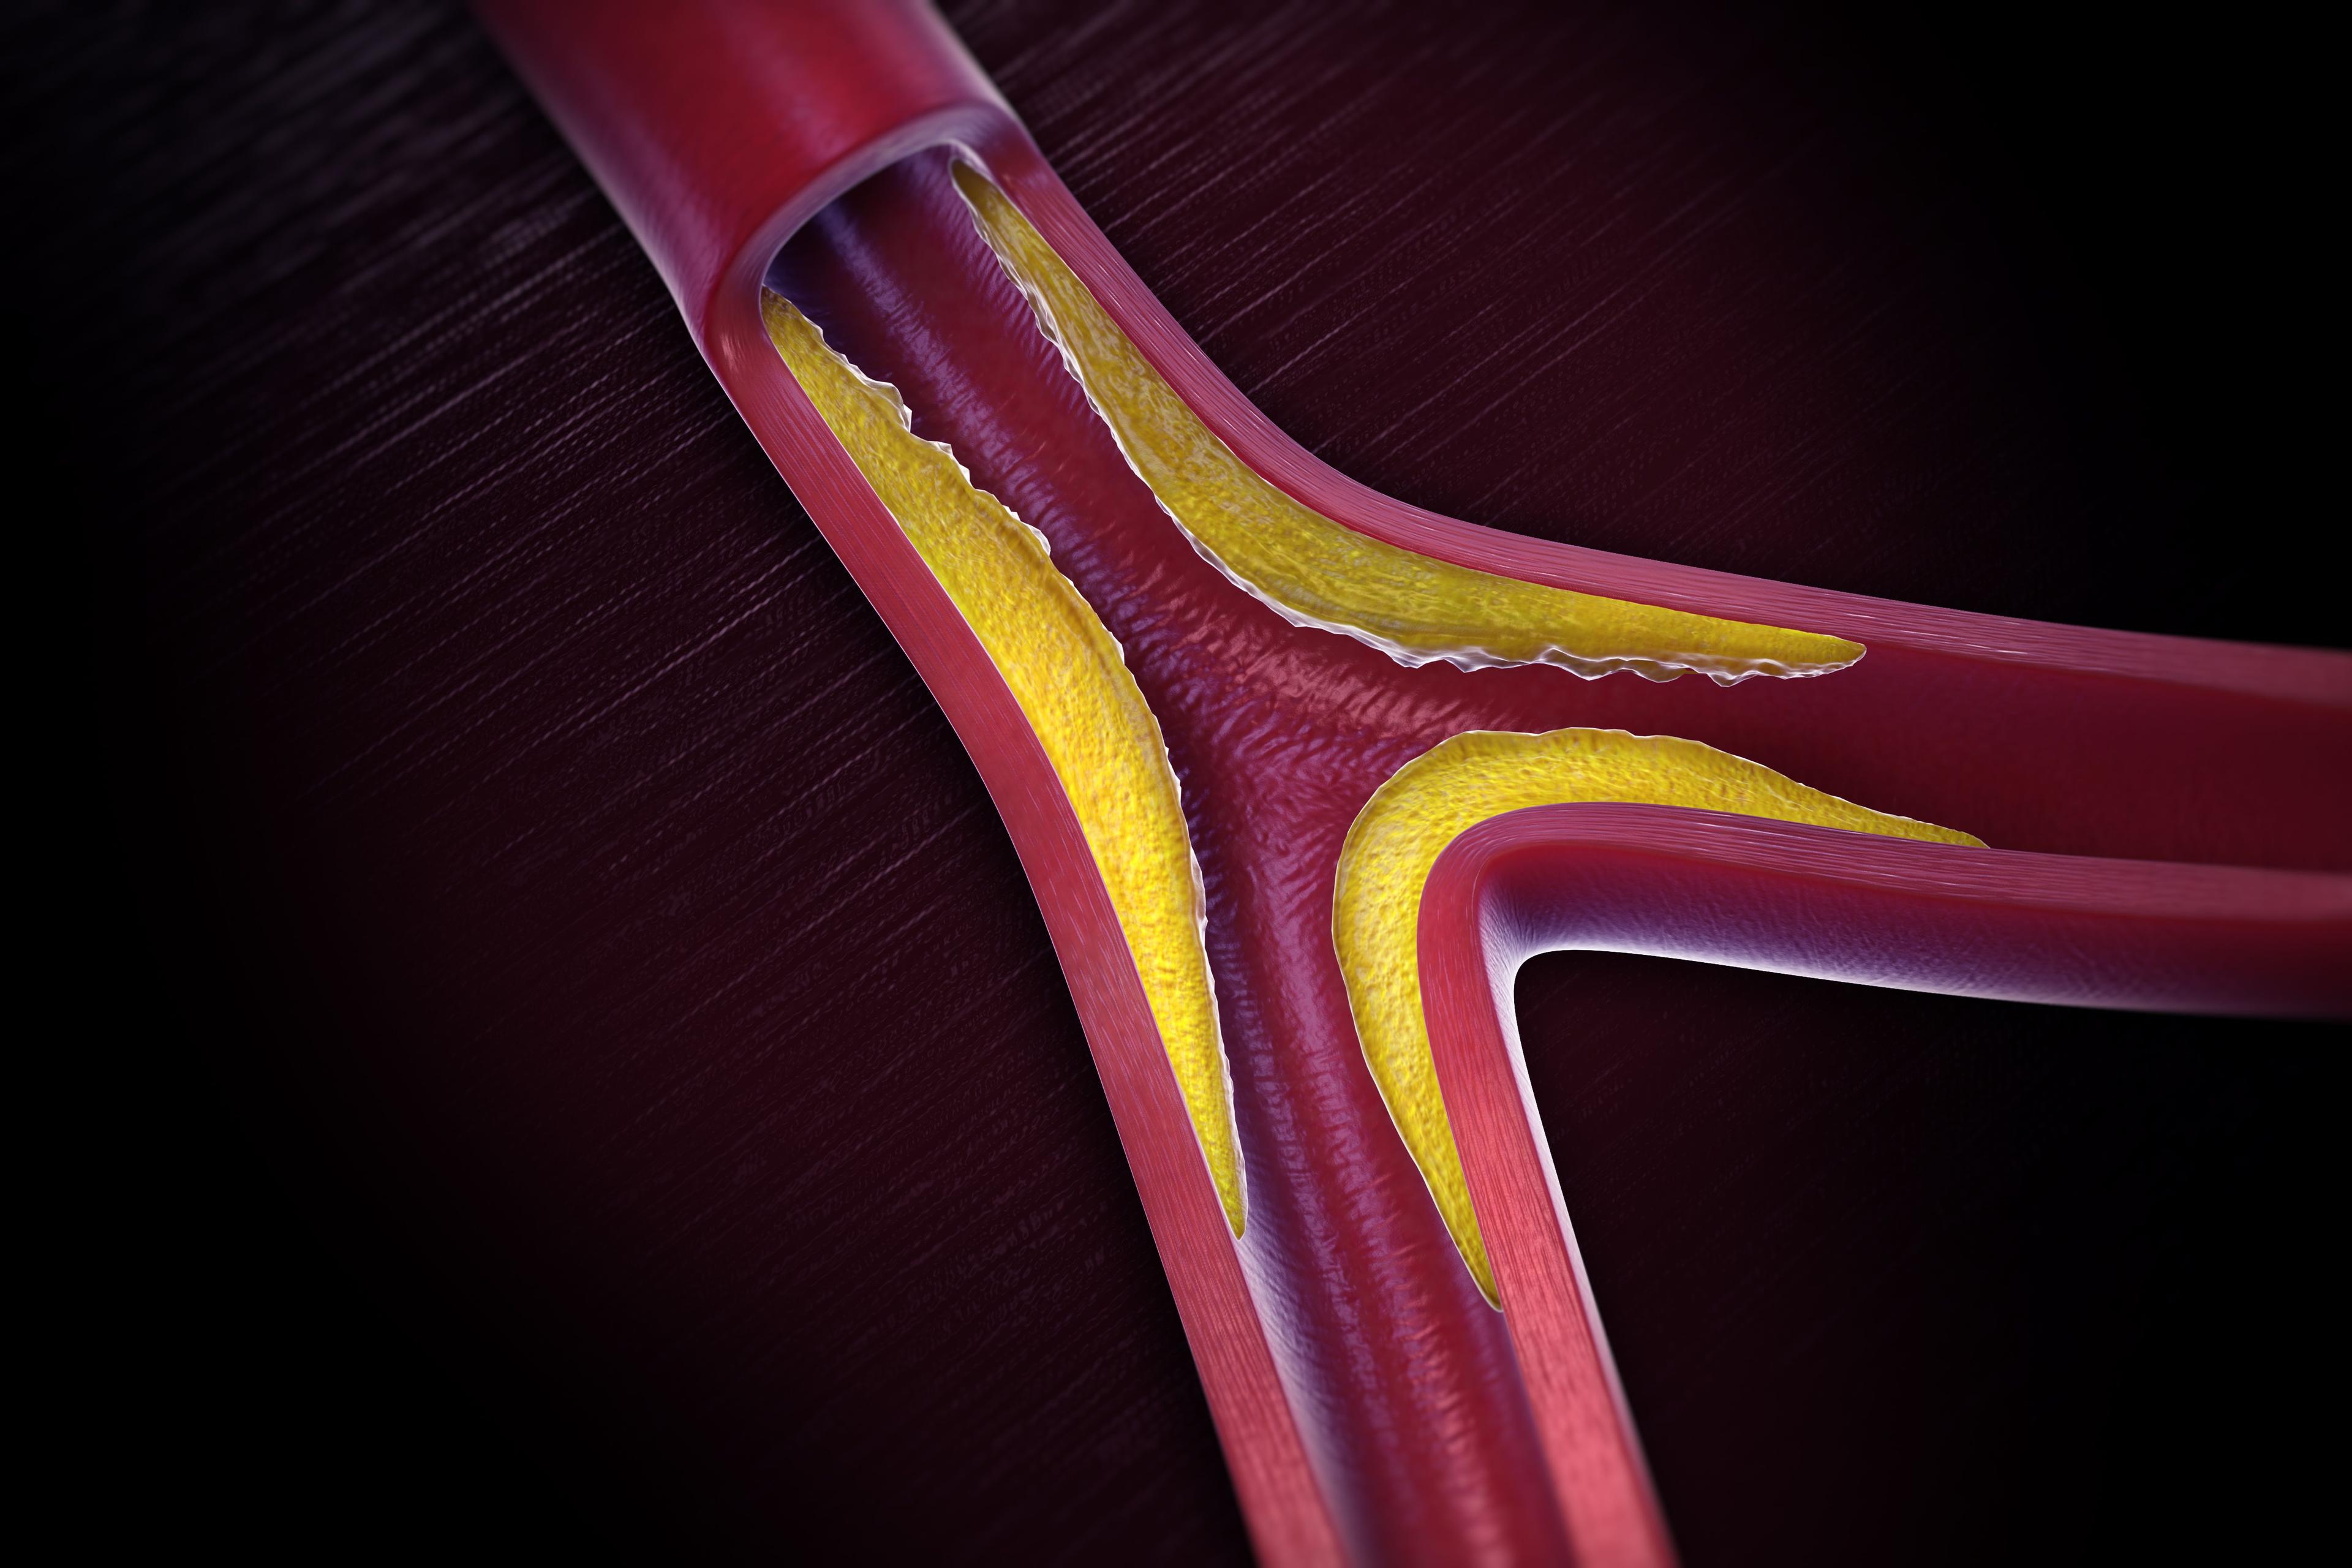 Article on What you have to know about Peripheral Artery Disease?